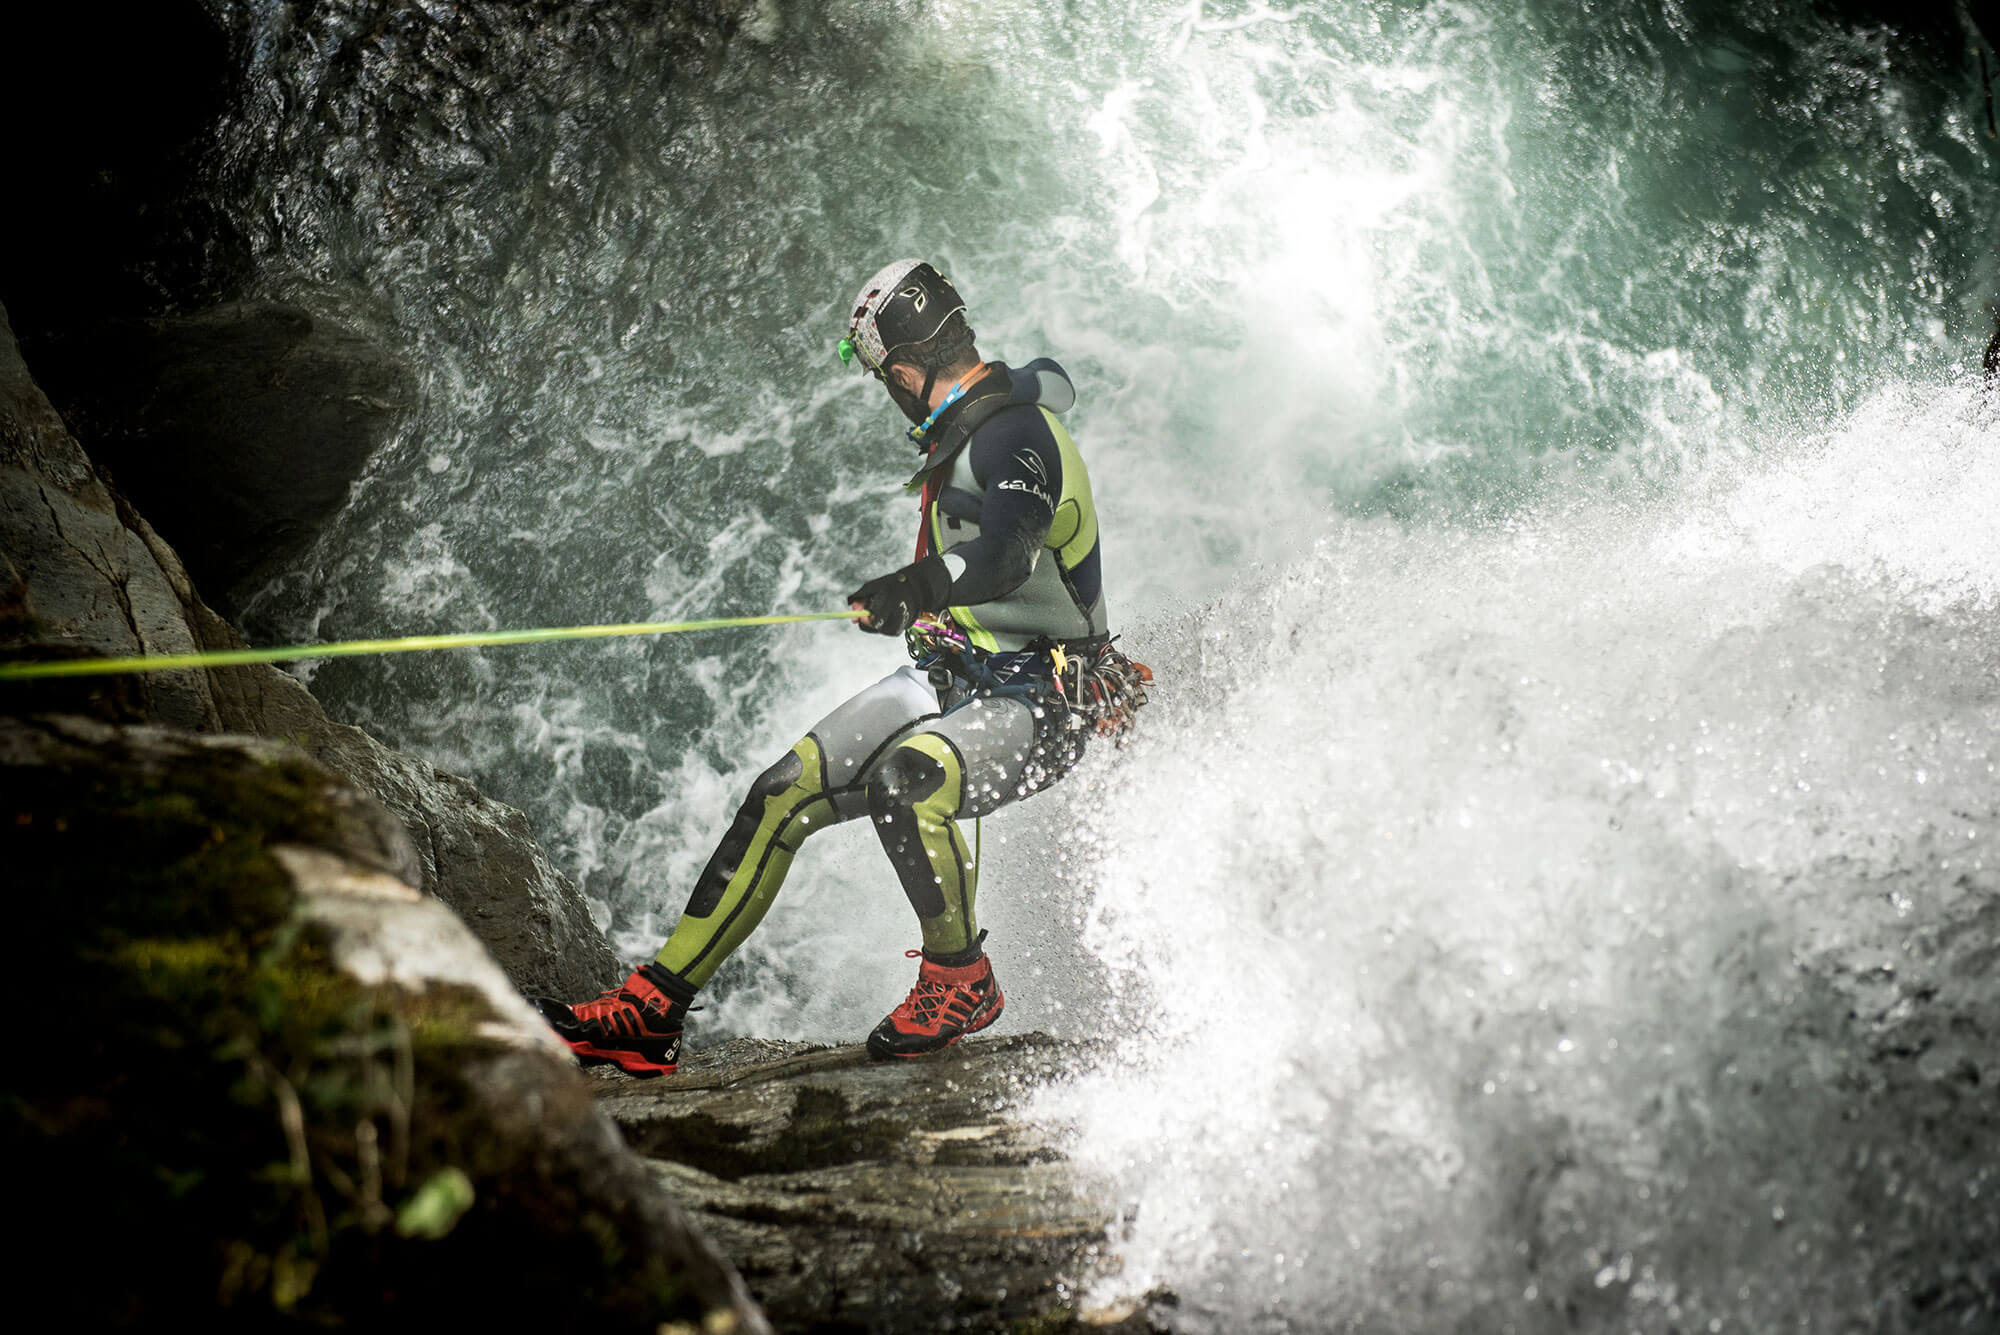 A photo of canyoning in flowing water